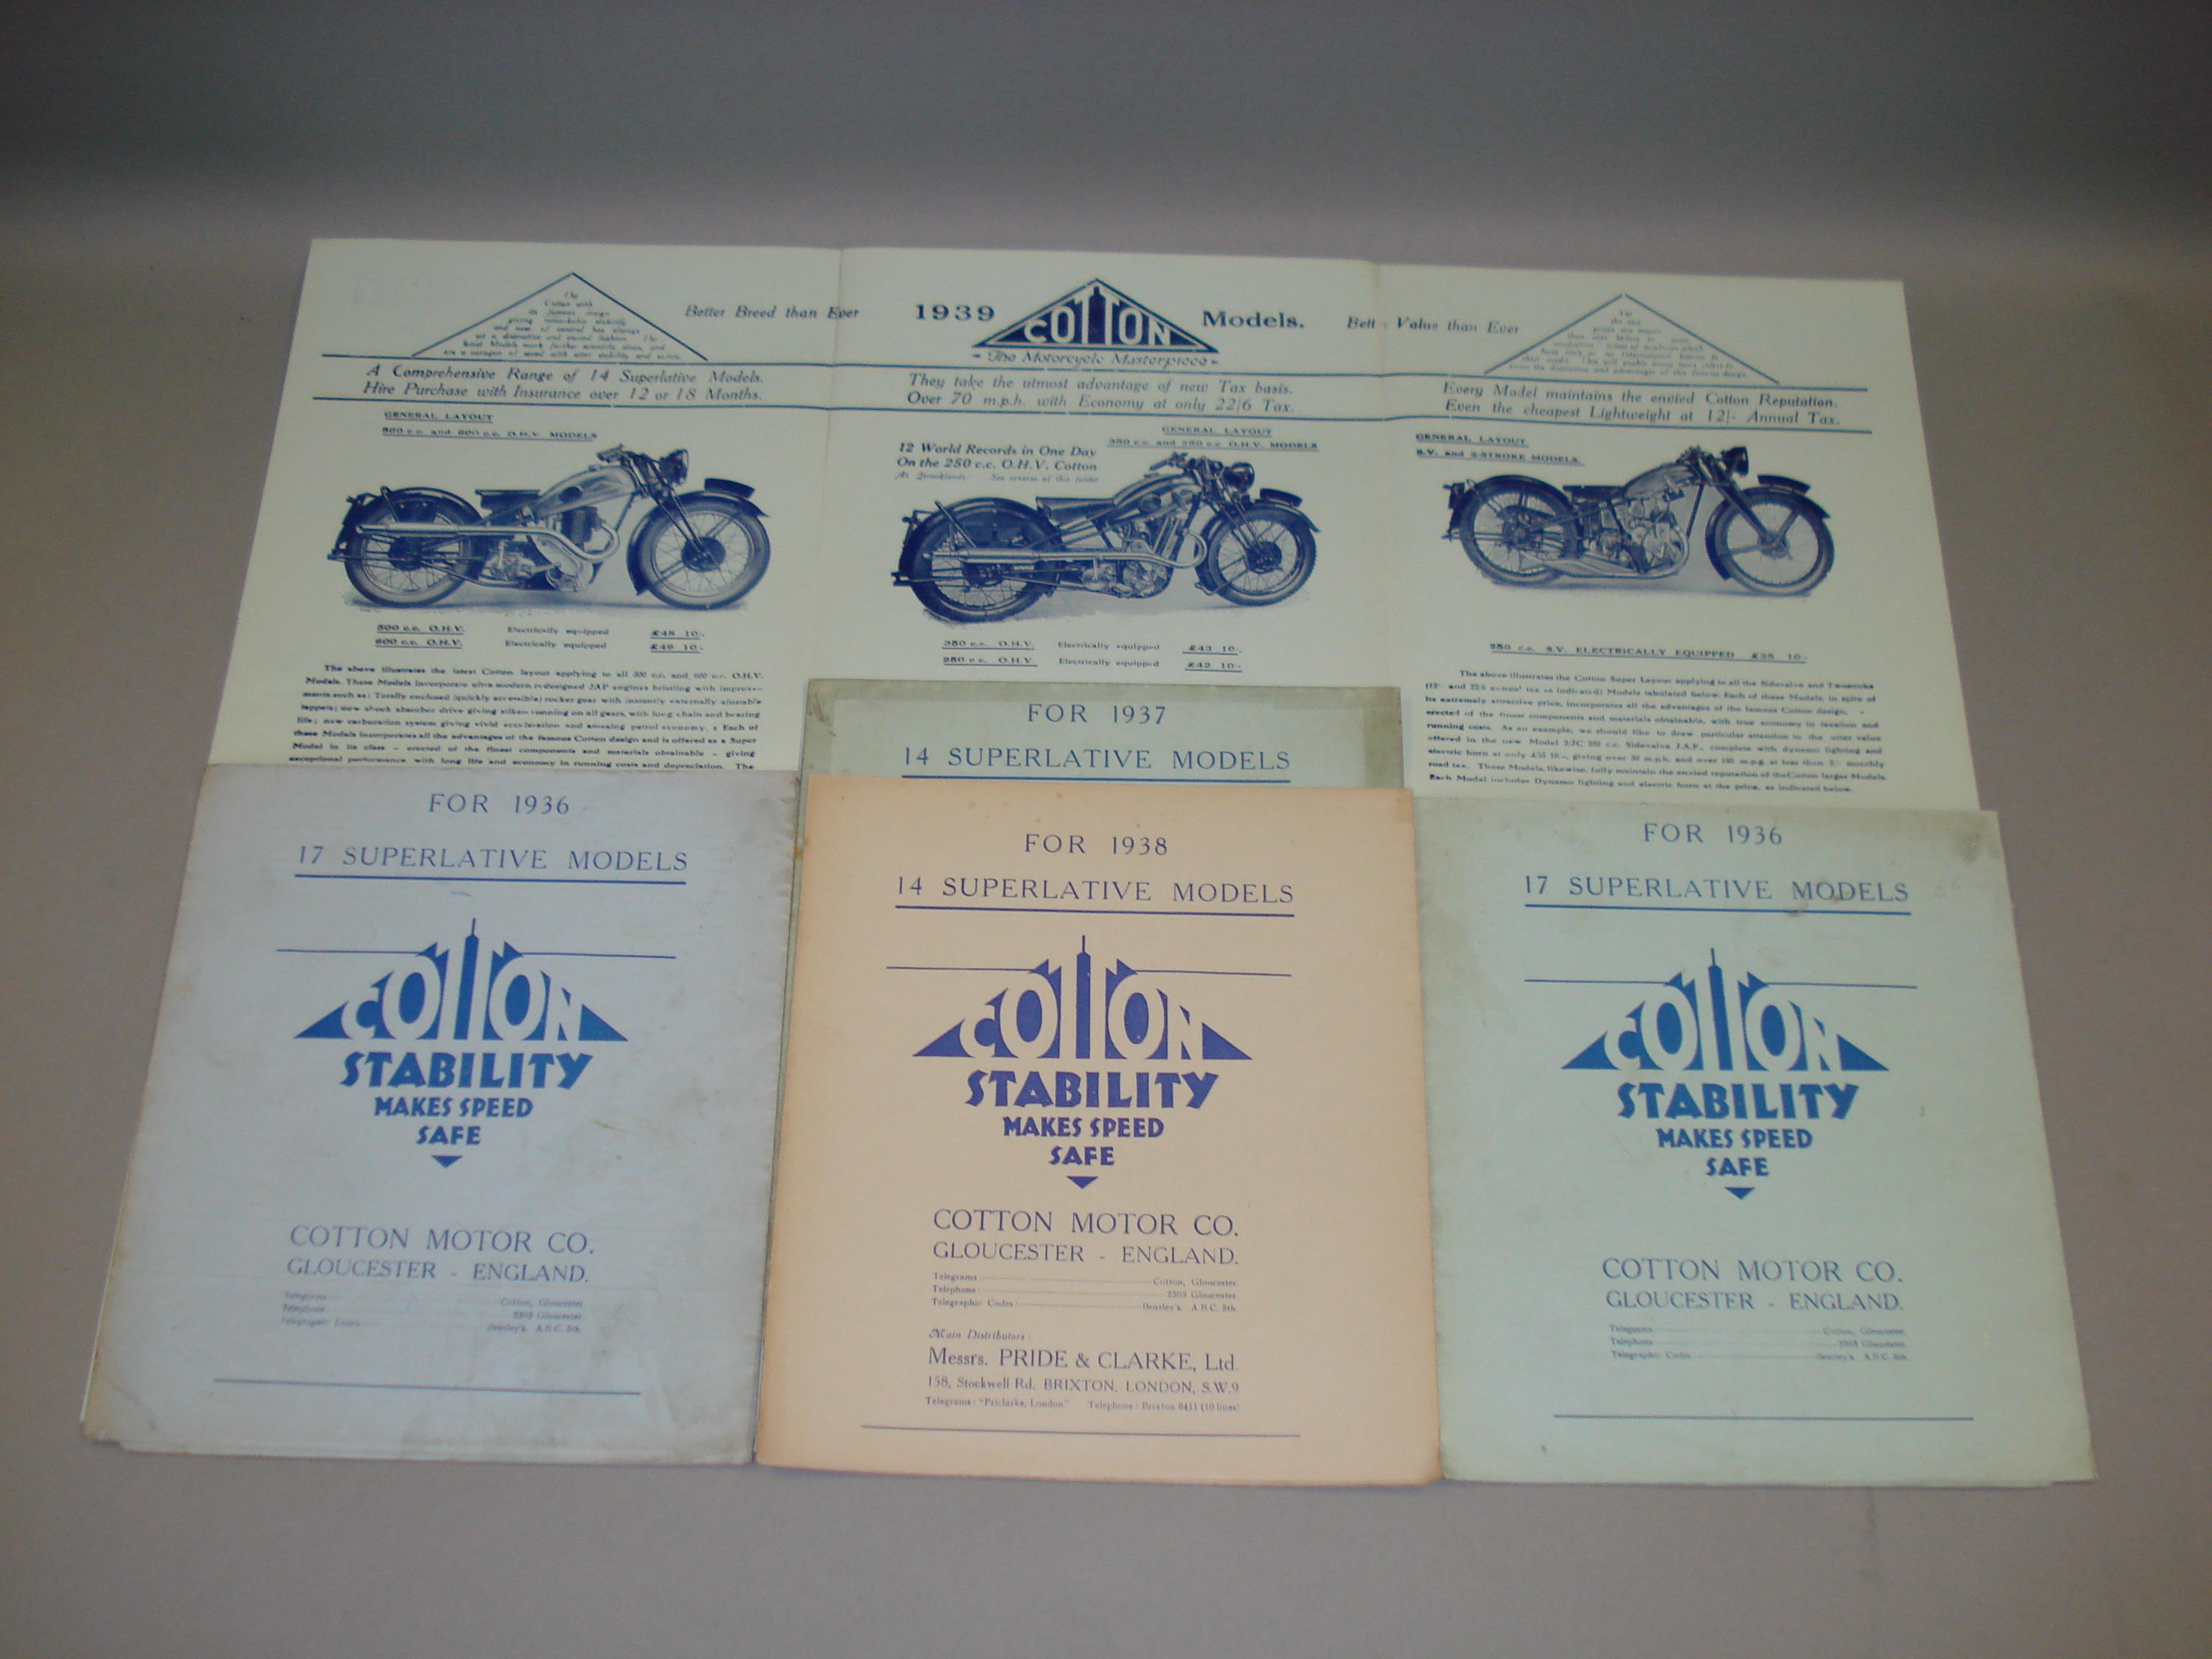 Cotton range brochures from the 1930s,